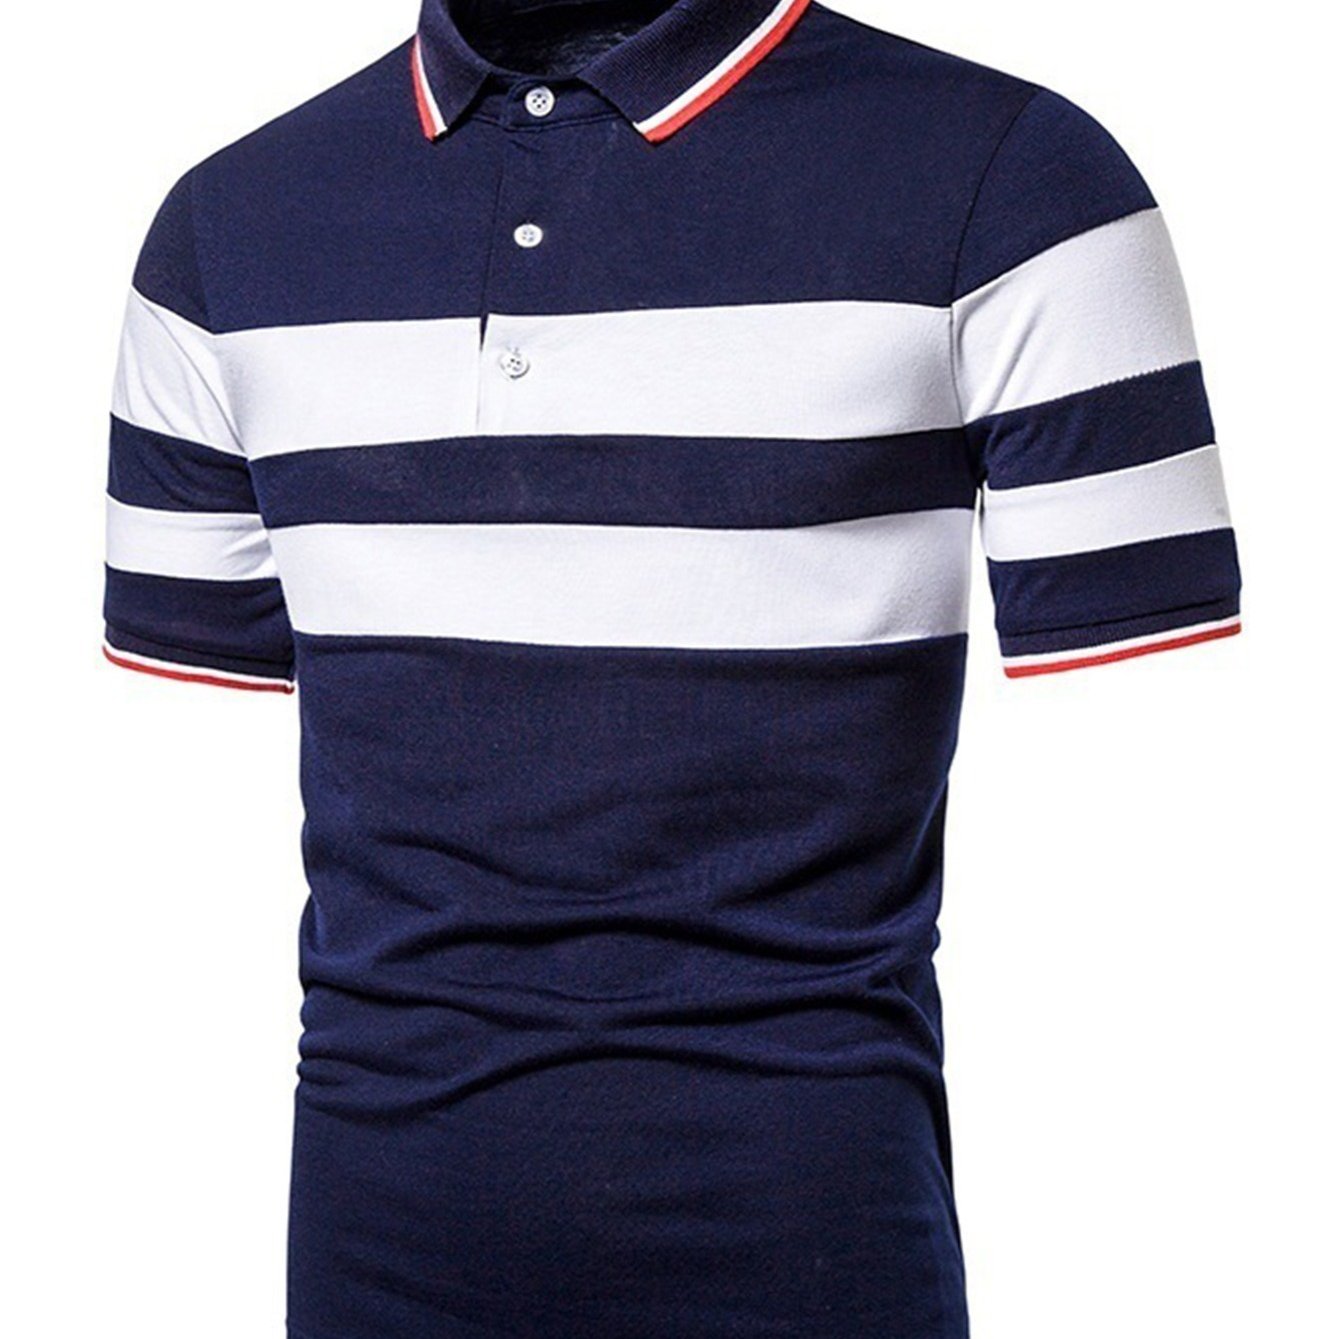 Men's Casual Striped Short Sleeve Polo Shirts